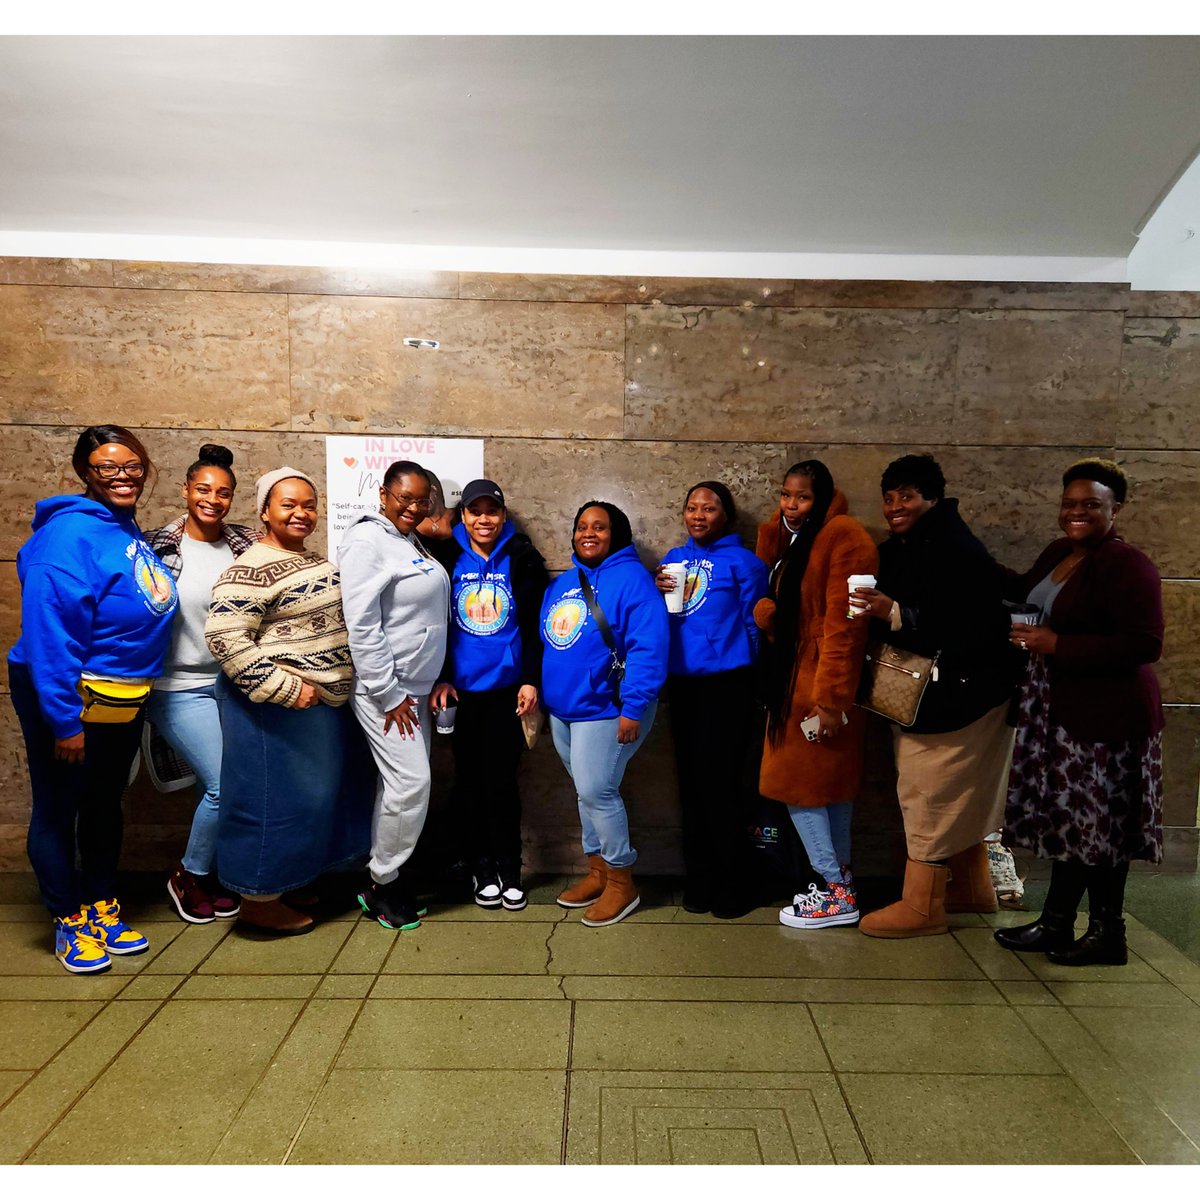 @17K091 P.S.92 @RELC_II @PS375Jackie @17K181 @PS770 @Ps241brooklynK @MS340NorthStar @EFMSRISE @newheightsms REPRESENTING @CSD17NYC at the parent coordinator conference. We had a great and enlighten time. @SheneanL @Philton73287848 @DrBeverlyLogan @Empressrose72